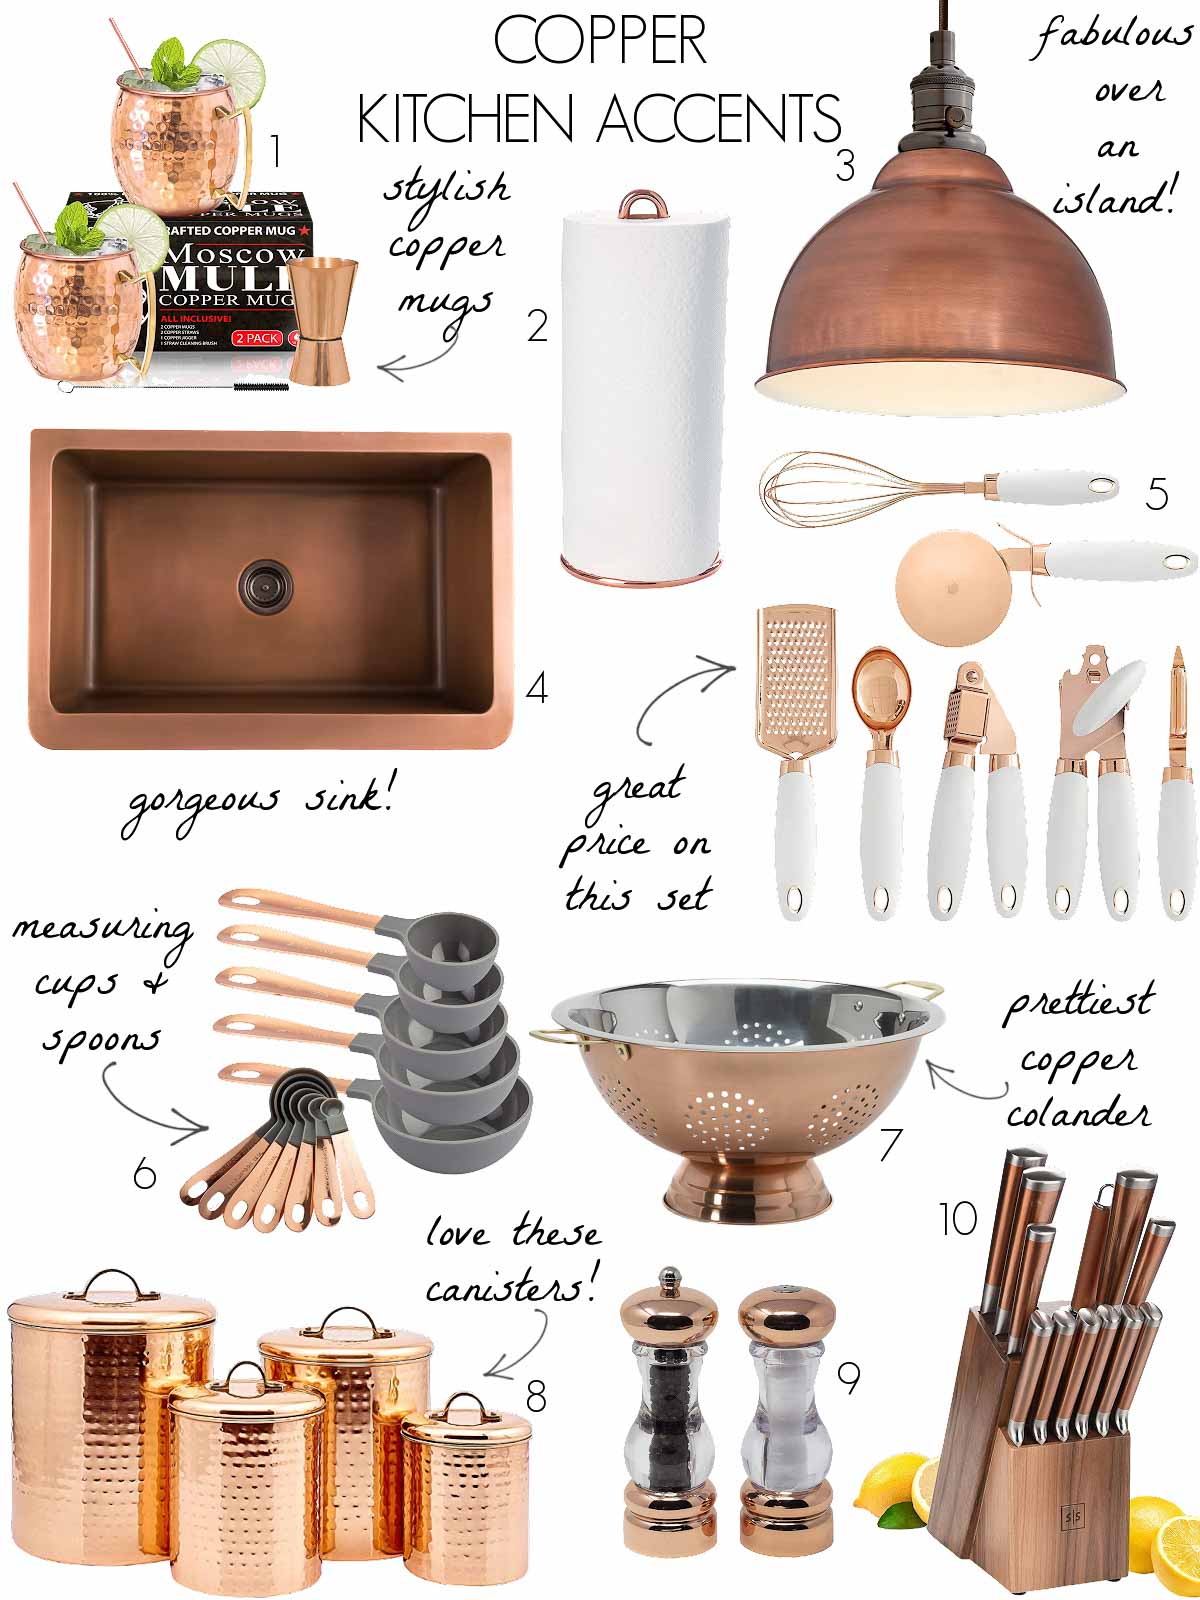 Copper kitchen accents - sink, mugs, lighting, and other kitchen accessories